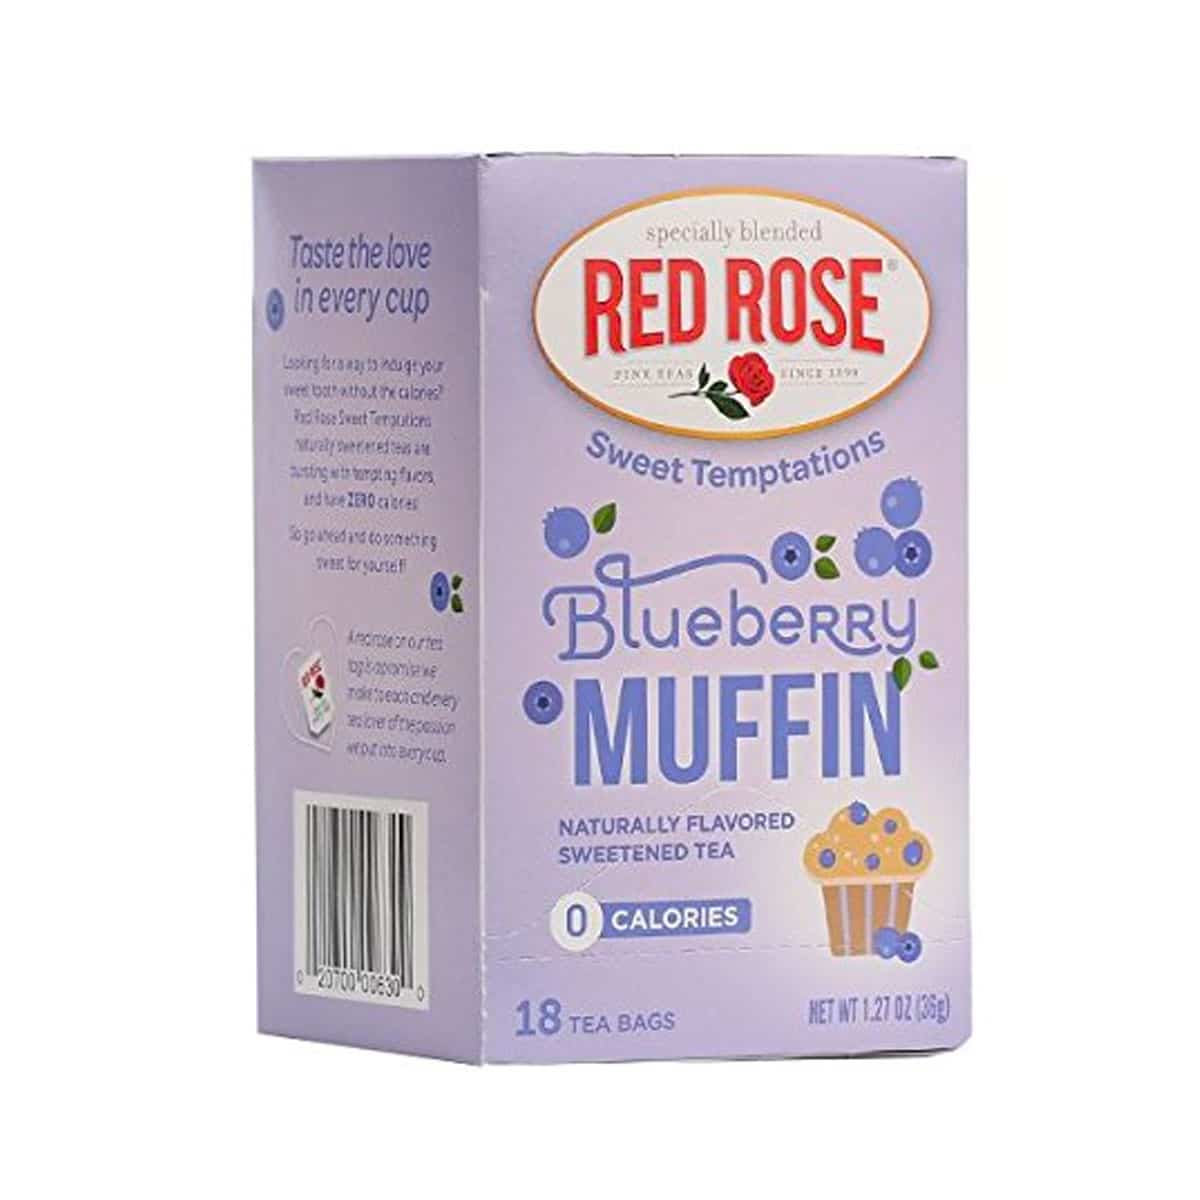 Red Rose Naturally Flavored Sweetened Tea (Blueberry Muffin Flavor)